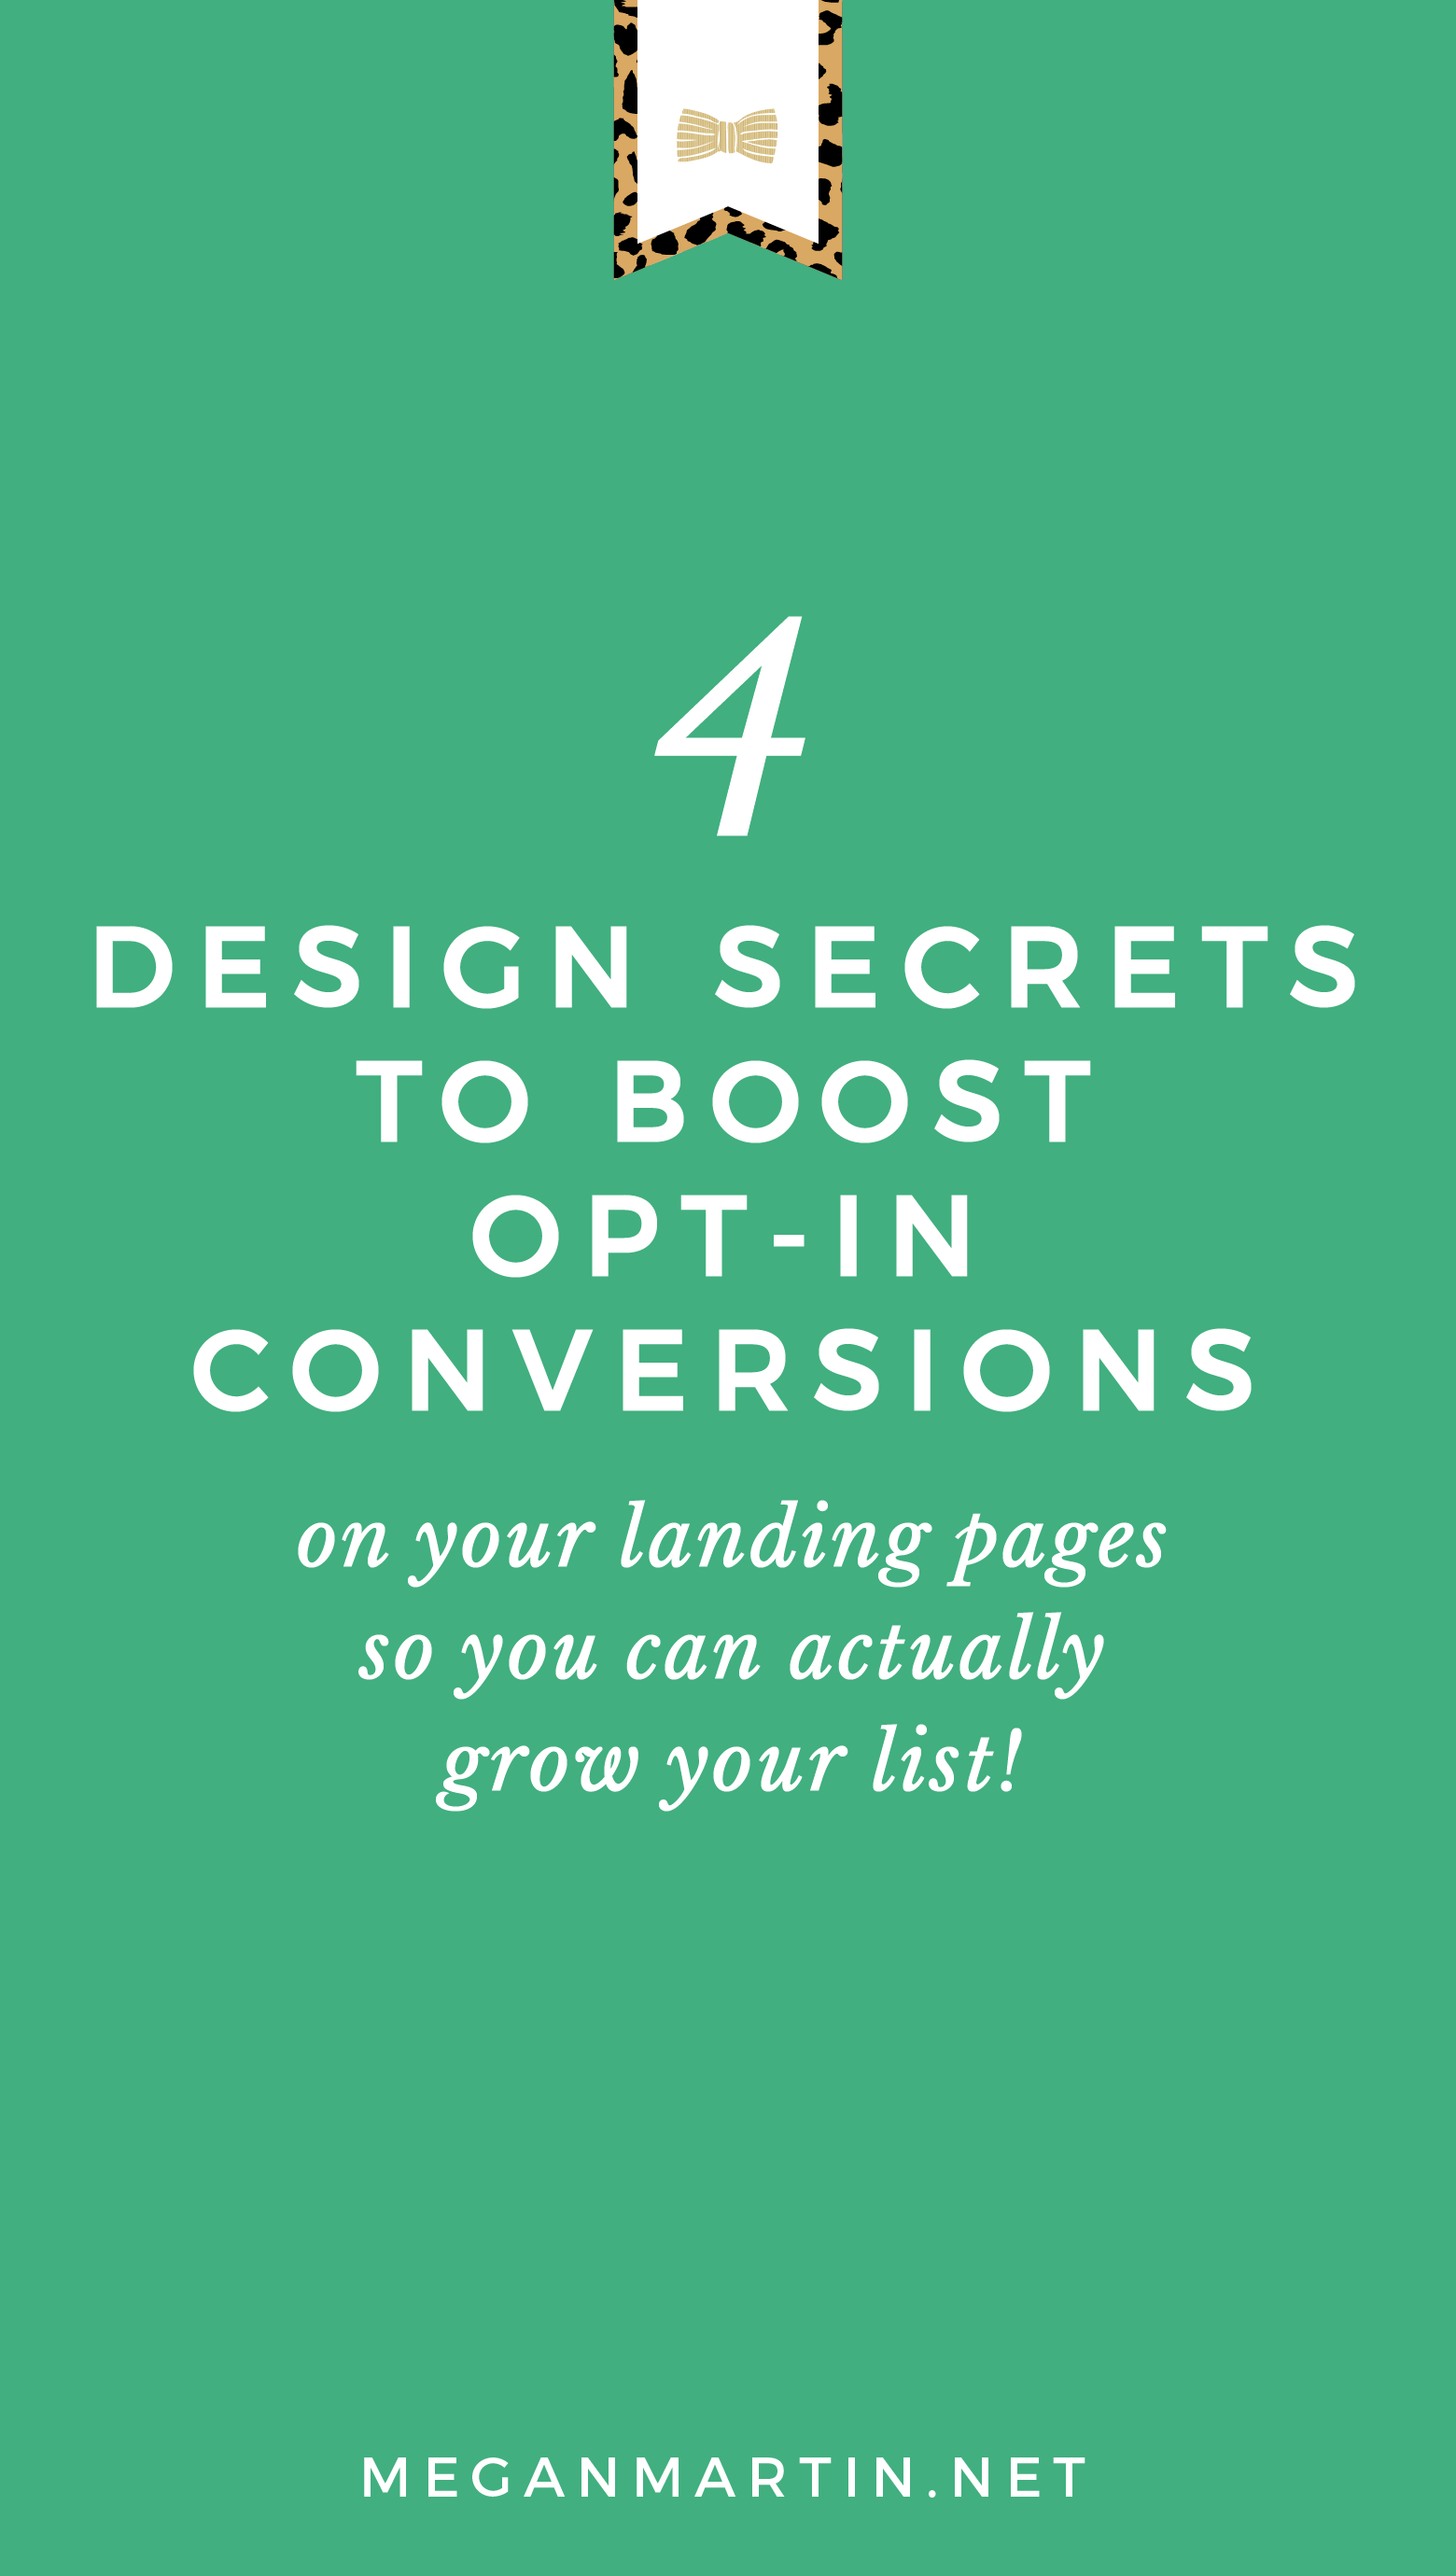 4 Design secrets to boost opt-ins on your landing pages. Learn how design and copywriting work together on your opt-in pages to increase conversions. 